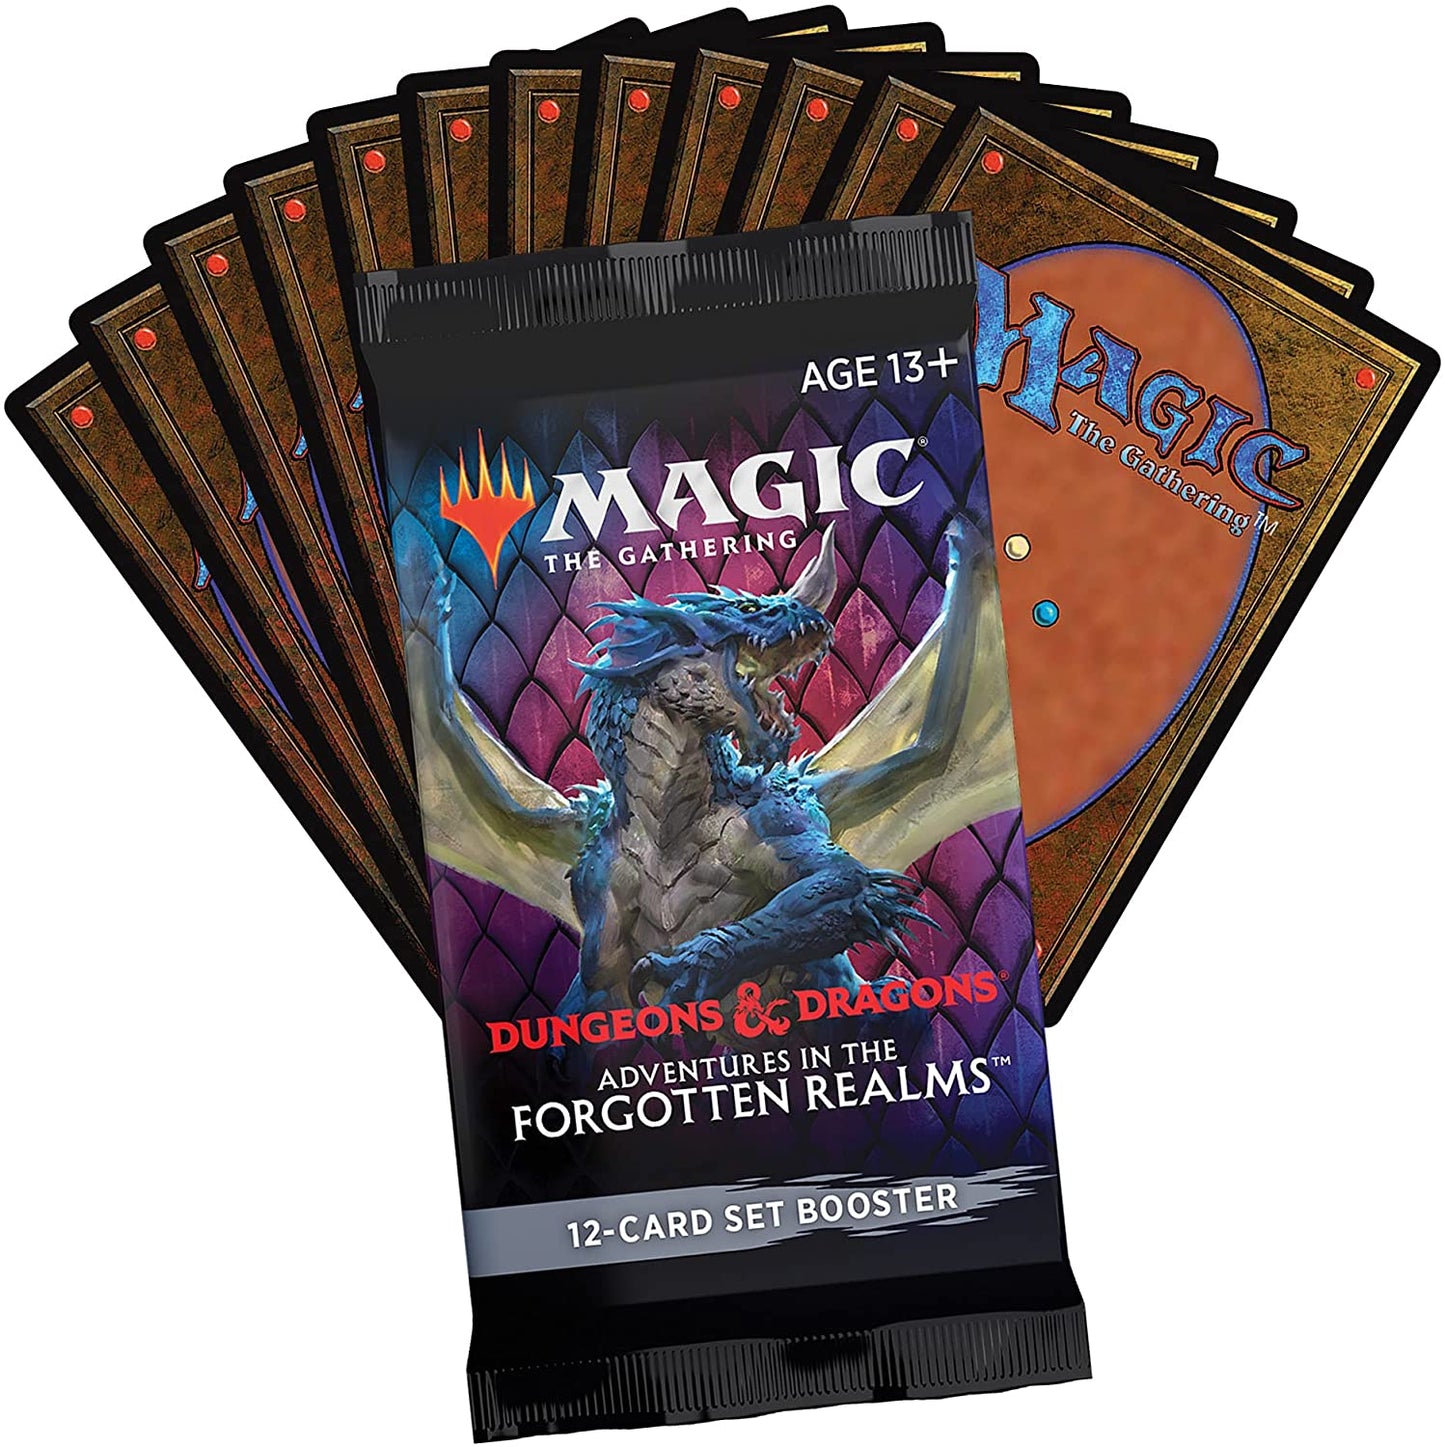 Magic: The Gathering Set Booster Box Case - Adventures in The Forgotten Realms (Case of 6)